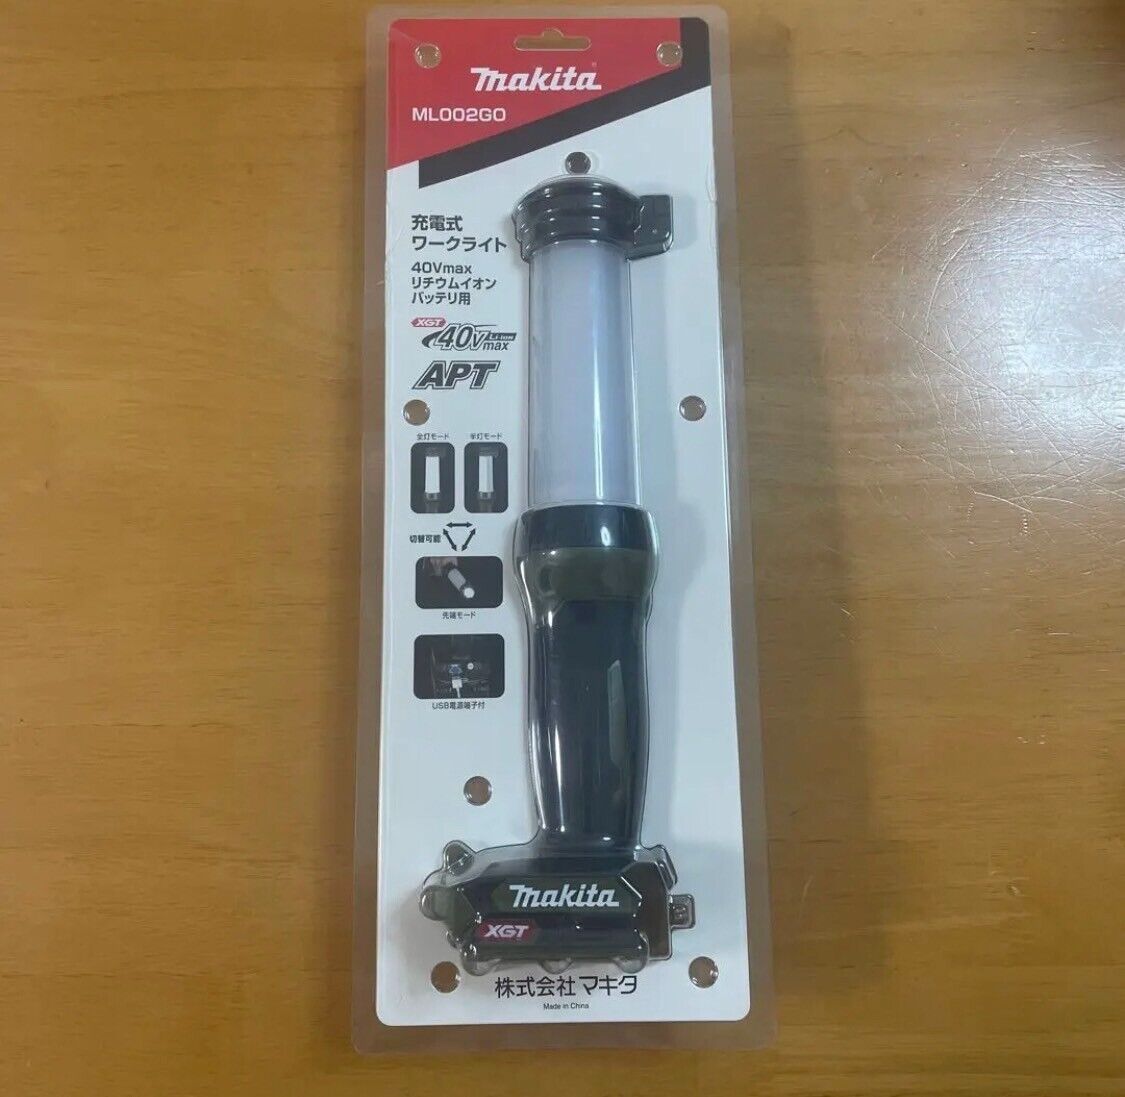 ML002GO Makita 40 V Max Rechargeable Work Light Olive Body Only